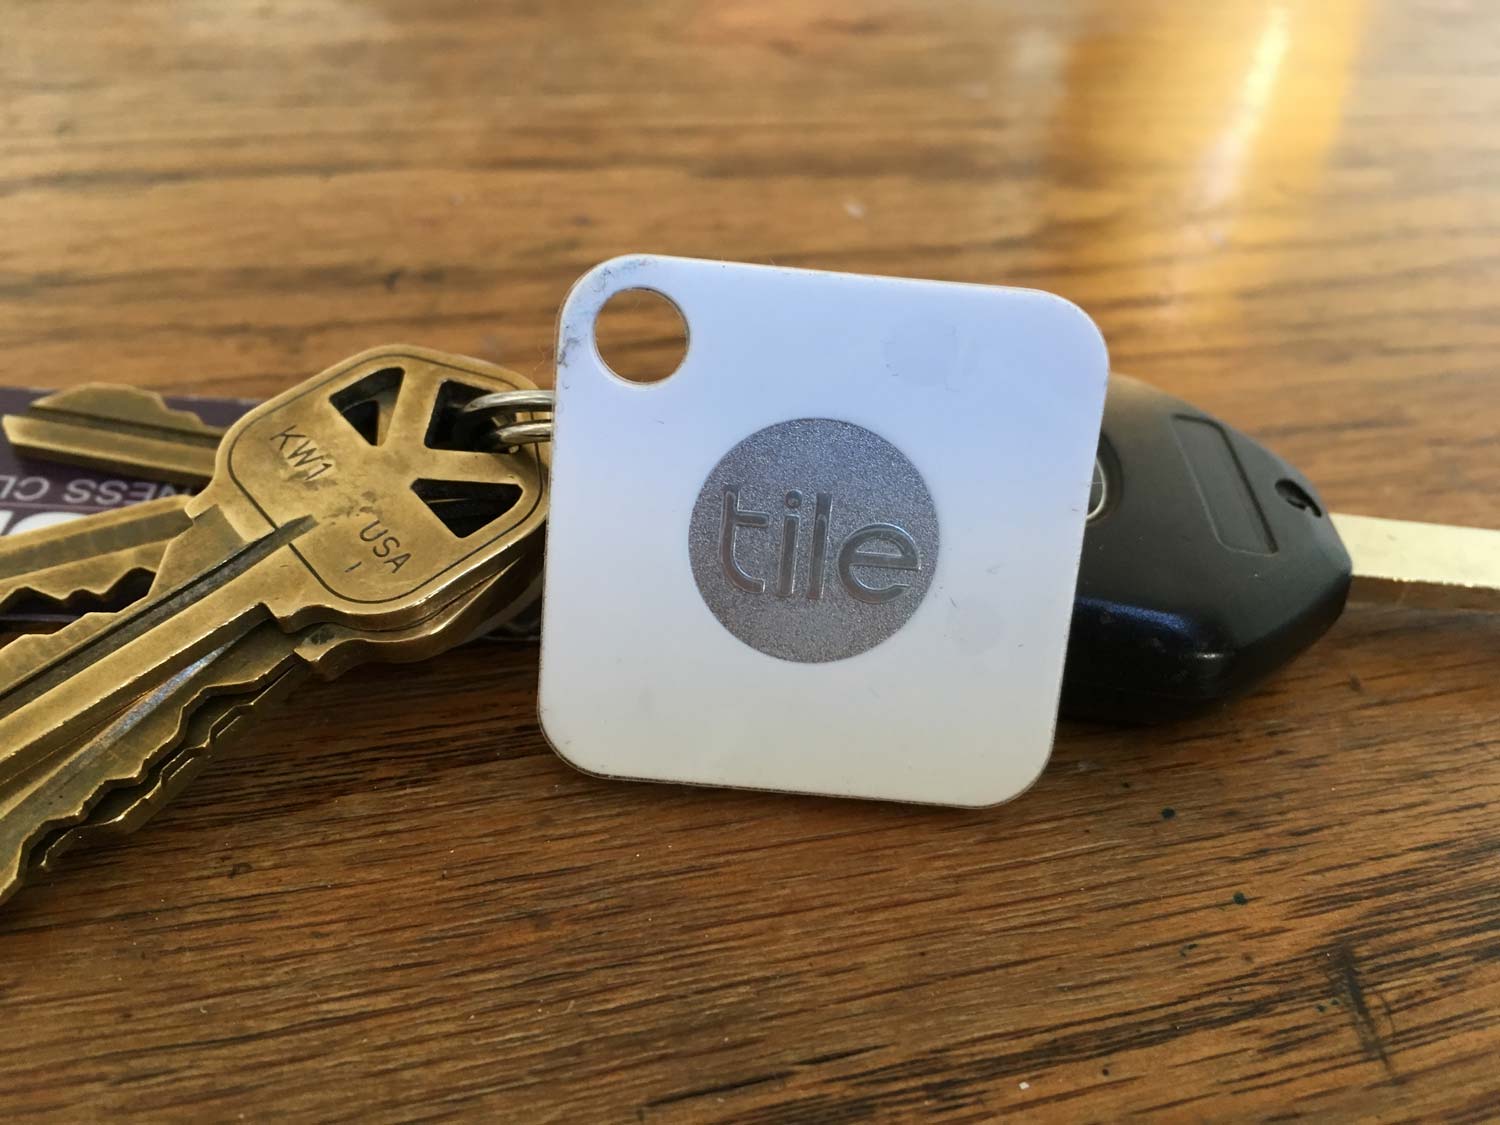 Tile Mate review A great key finder under 30 Tom's Guide